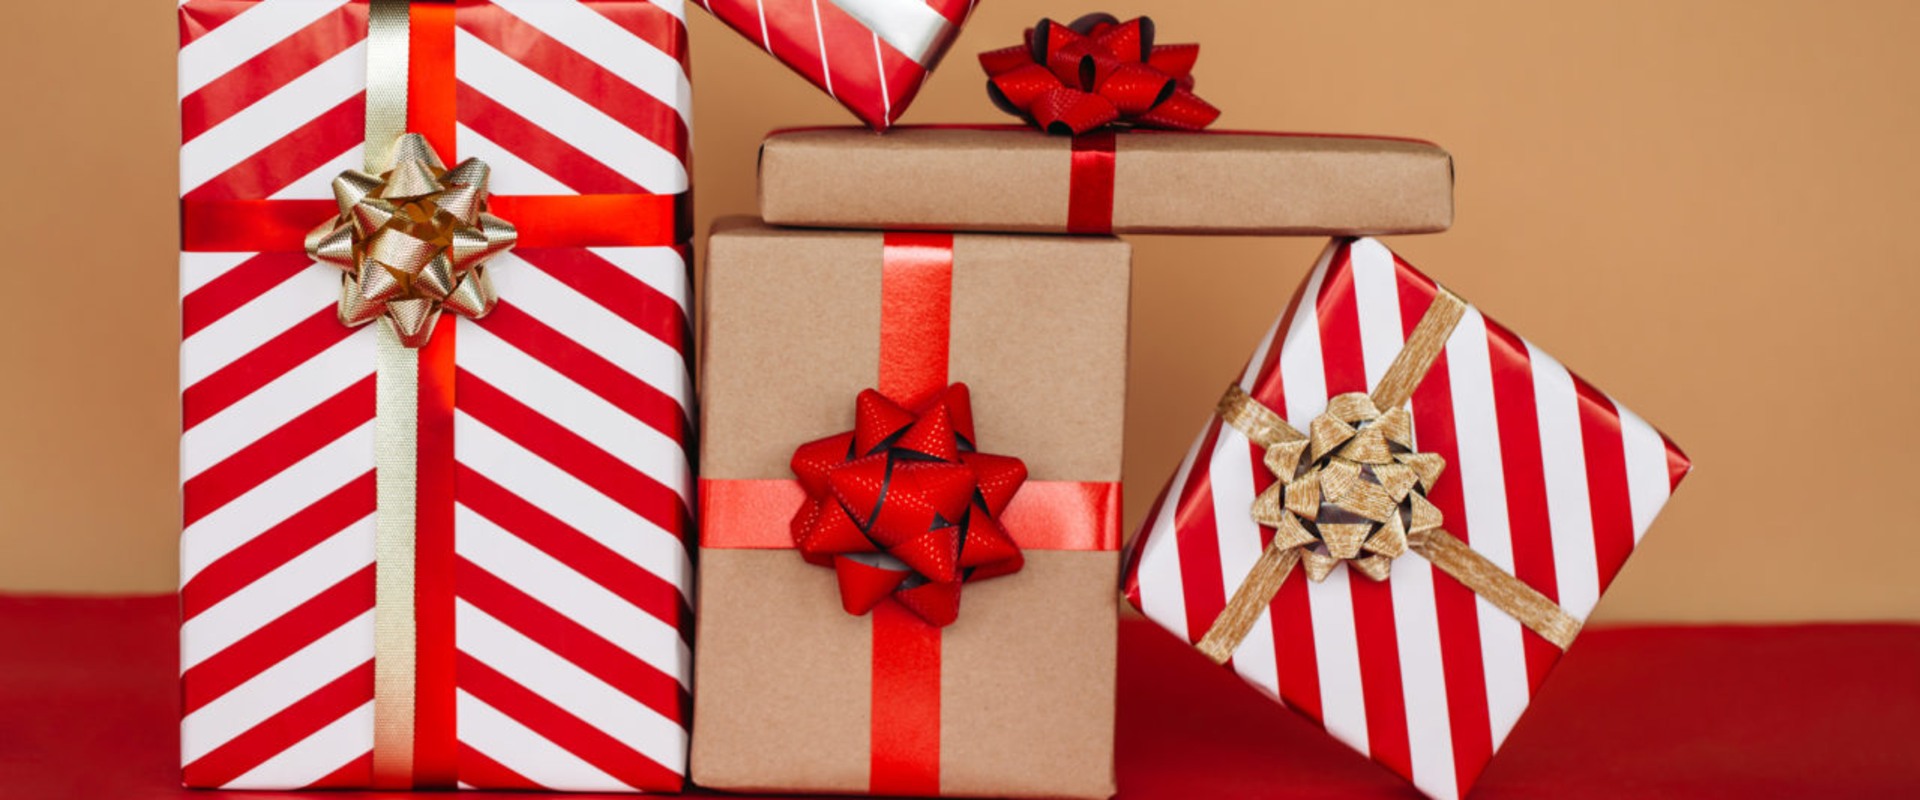 Can christmas wrapping paper be recycled?